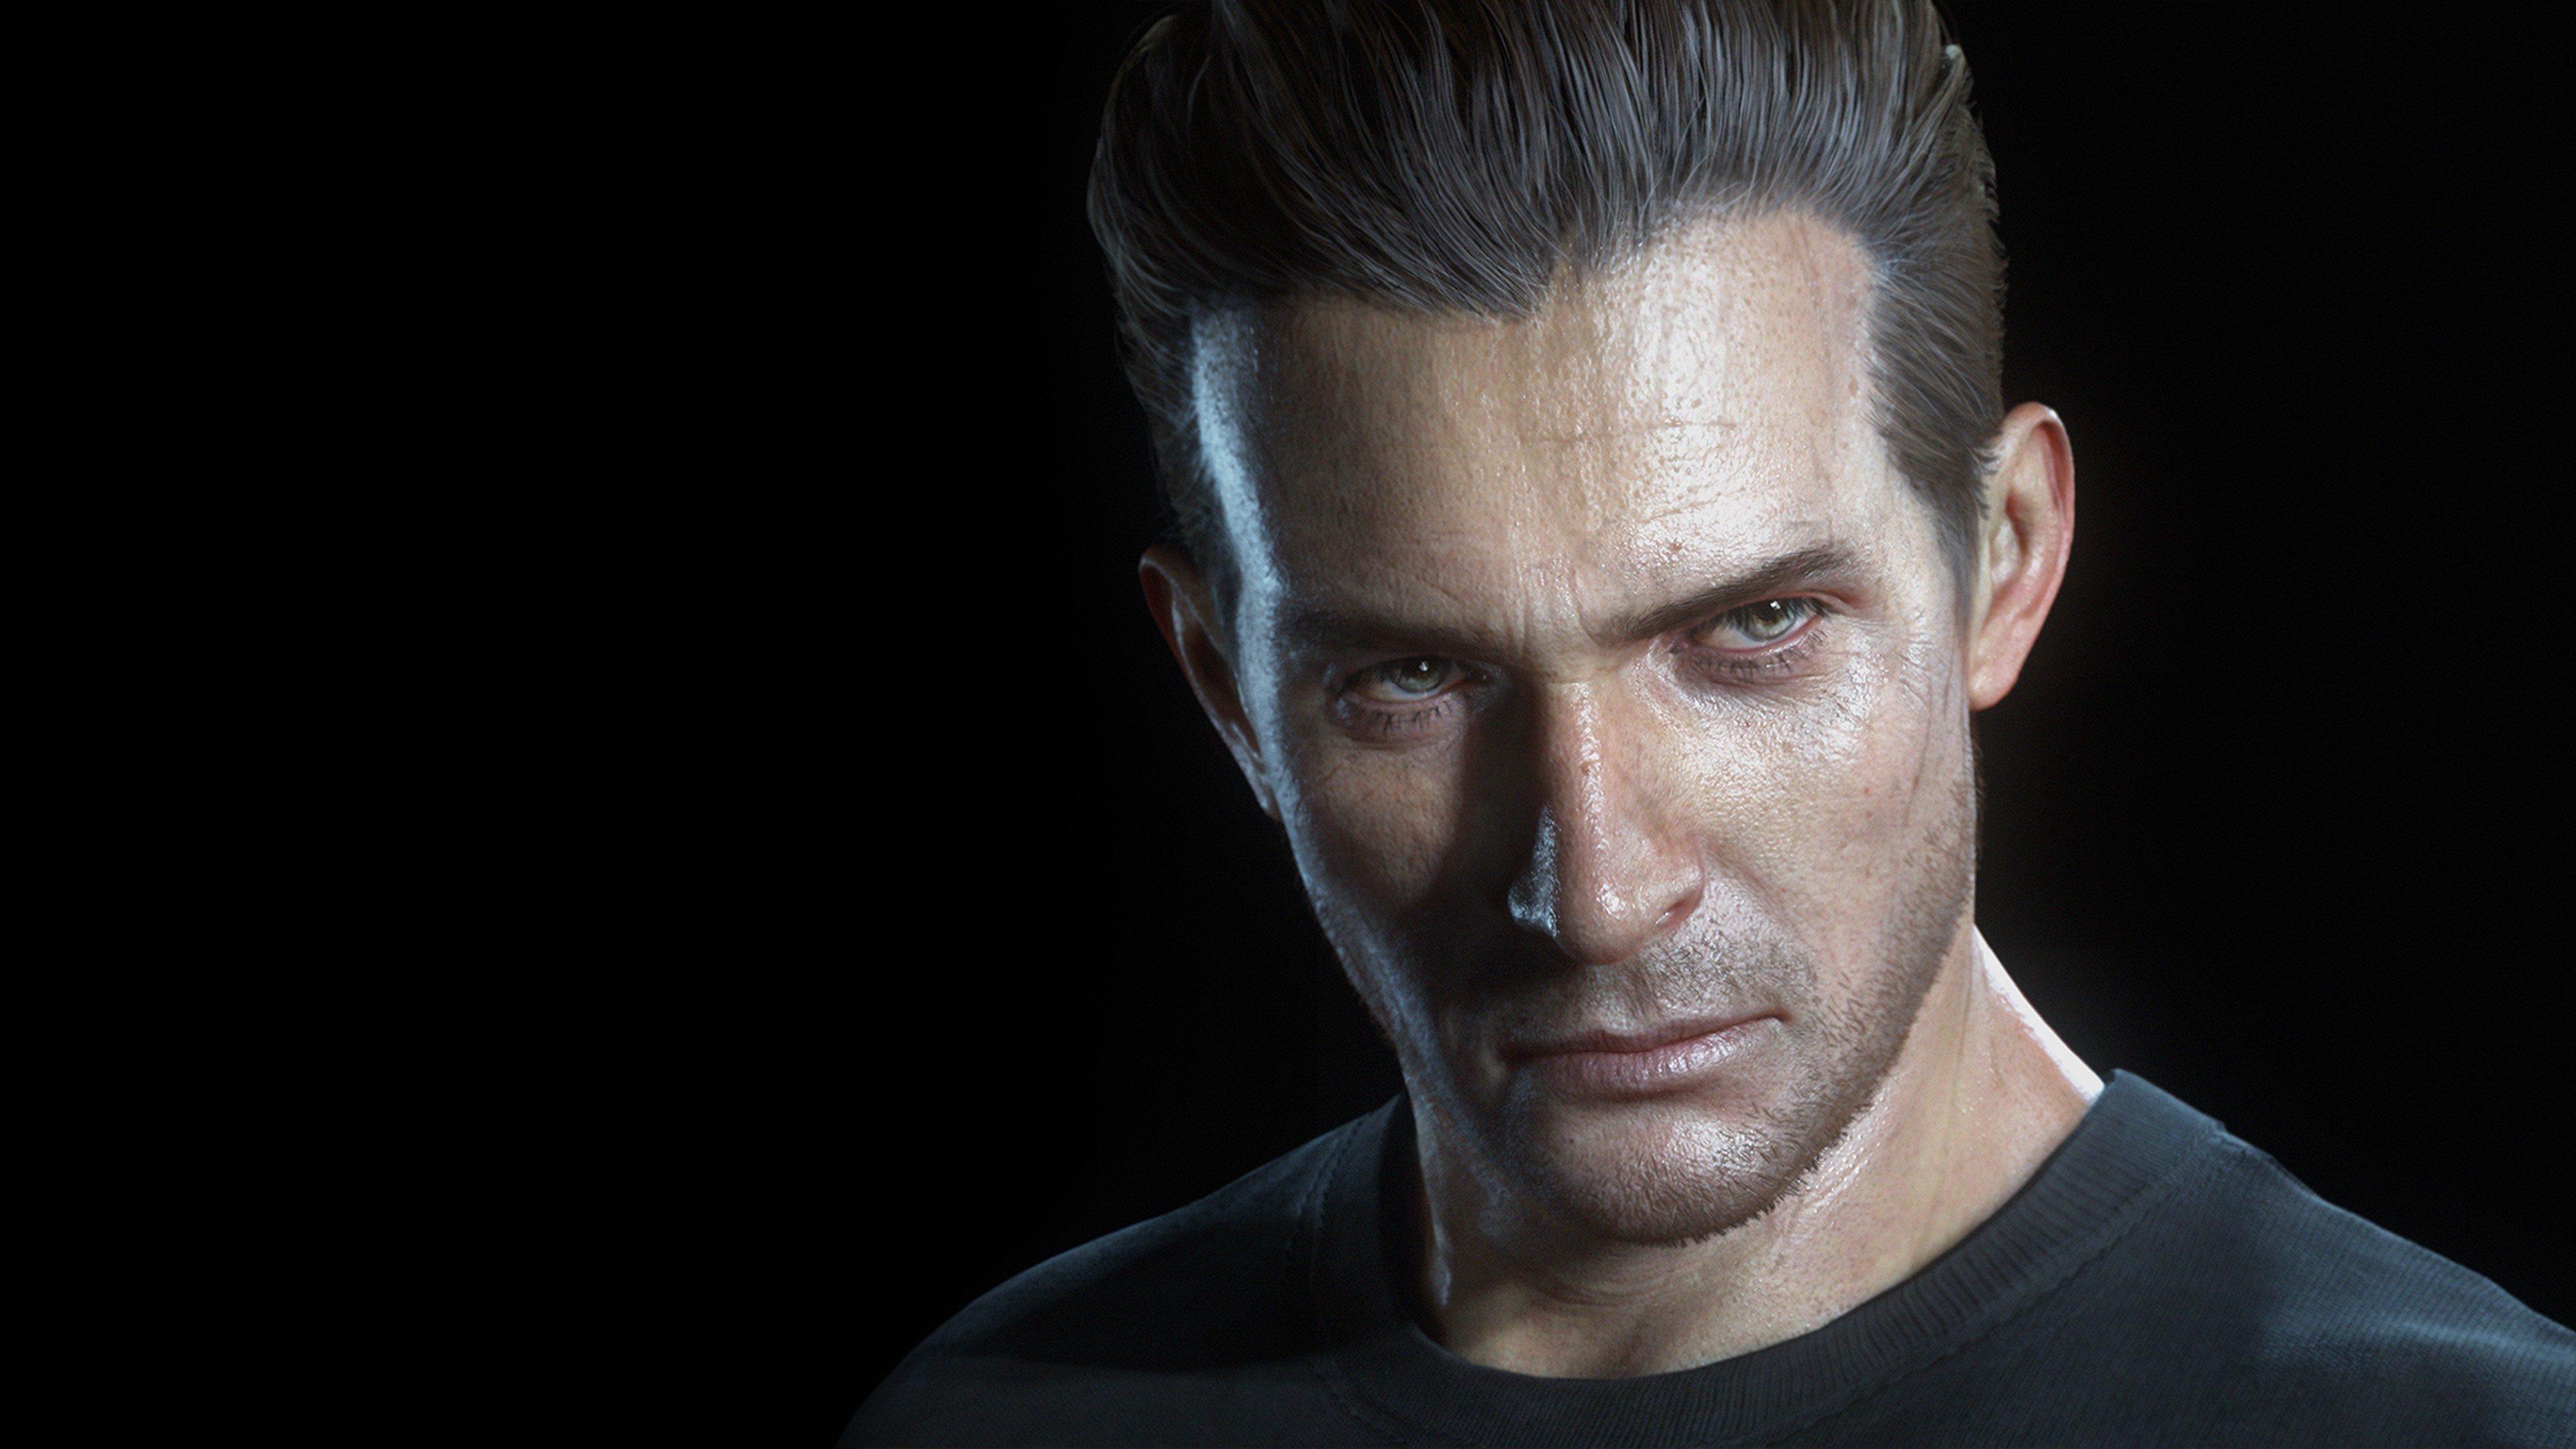 467336-Rafe-uncharted-Uncharted_4_A_Thief039s_End-rafe_adler.jpg